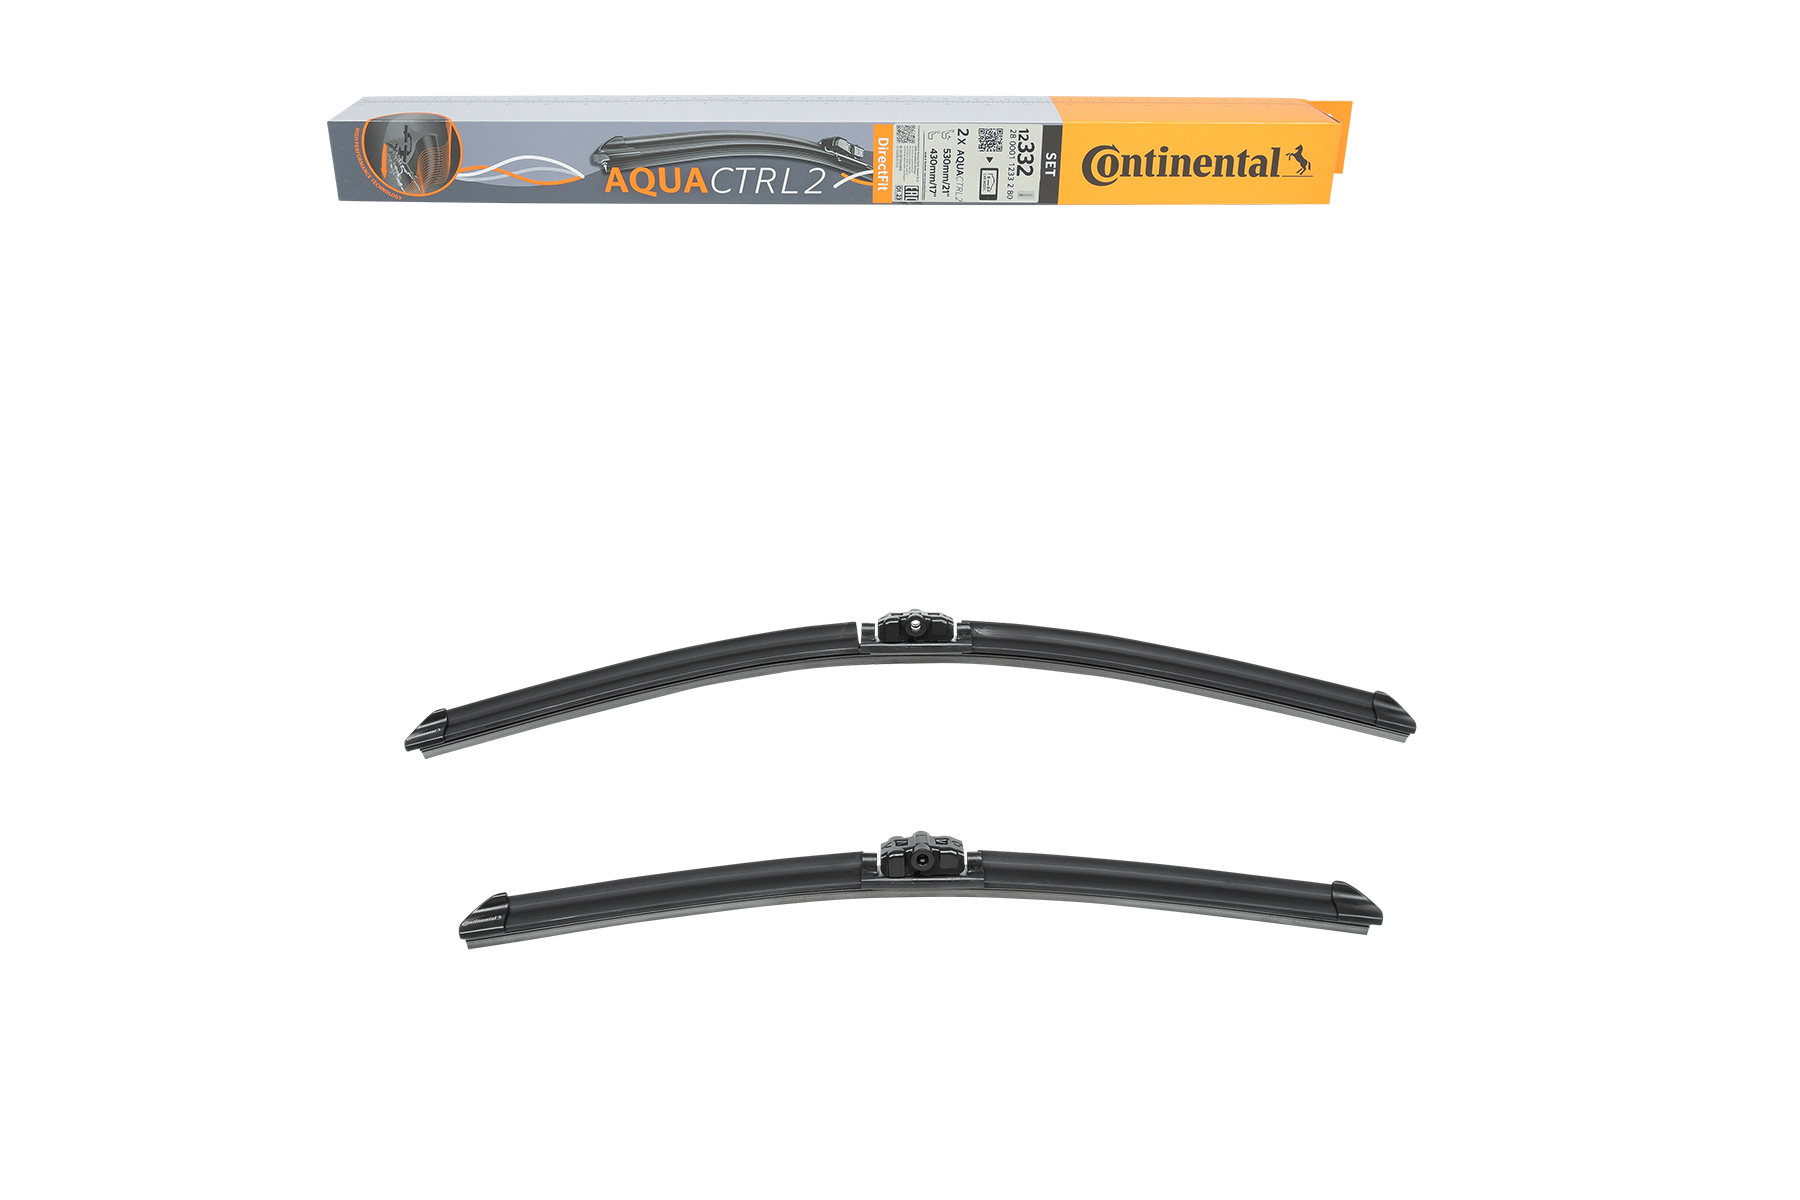 12332 Continental AQUACTRL2 530, 430 mm Front, Flat wiper blade, with spoiler, 21/17 Inch Styling: with spoiler Wiper blades 2800011233280 buy